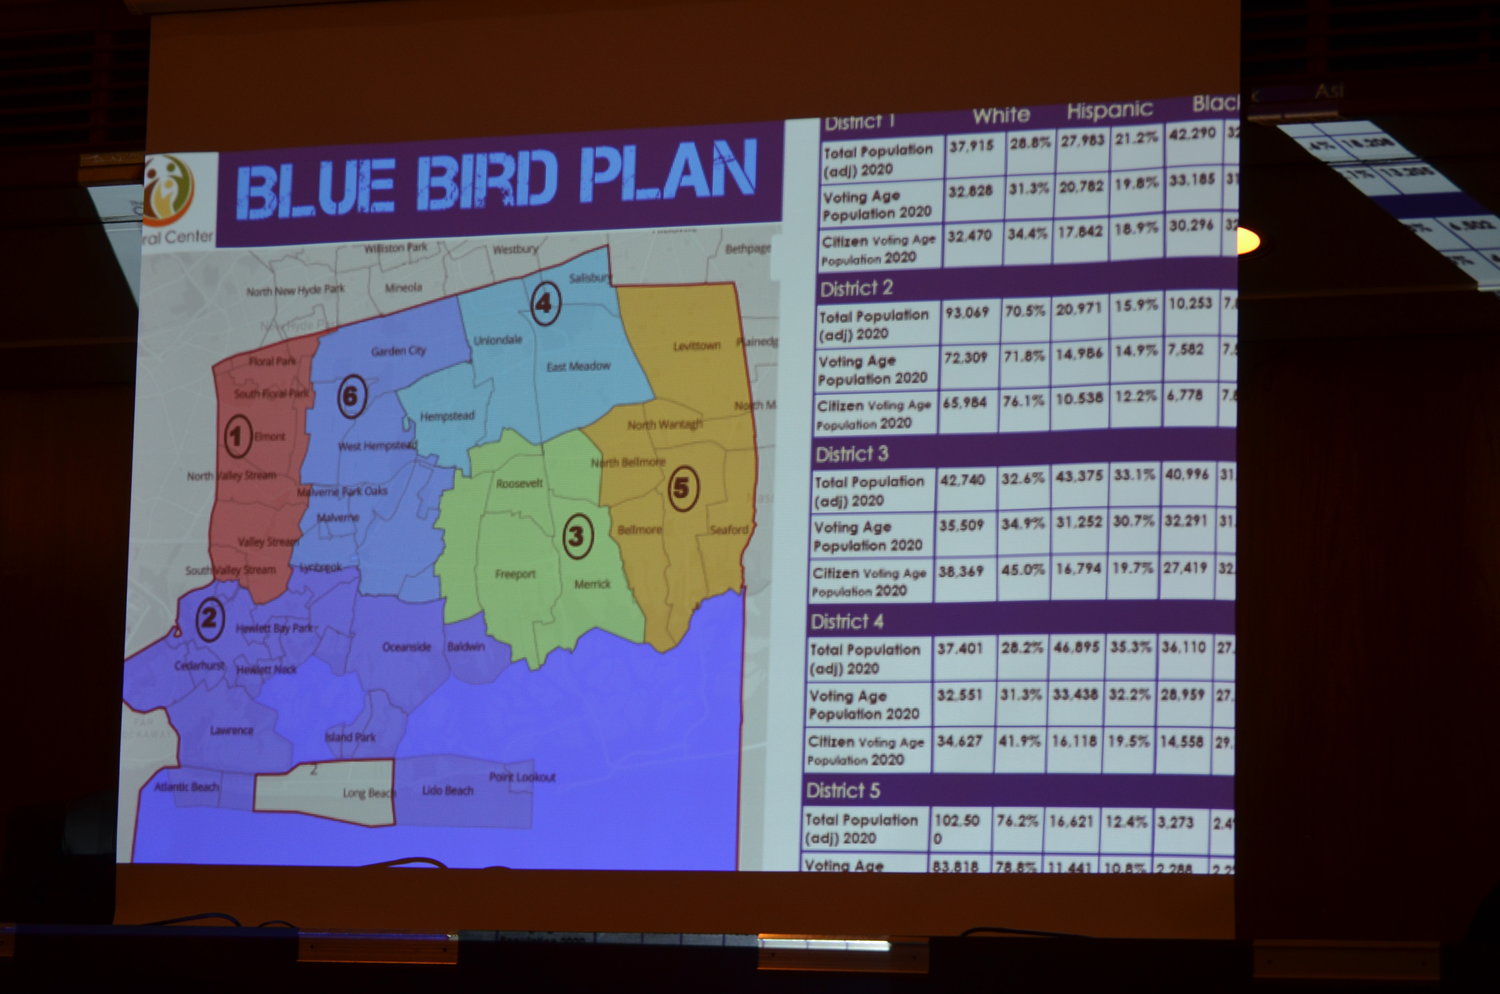 The Elmont Cultural Center’s “Blue Bird Plan” keeps Elmont and Valley Stream in one minority-majority district, while the Town of Hempstead’s proposed district maps does not. The proposed map created by Skyline Consulting has drawn criticism from civic groups and law experts for violating federal and state voting rights protections.